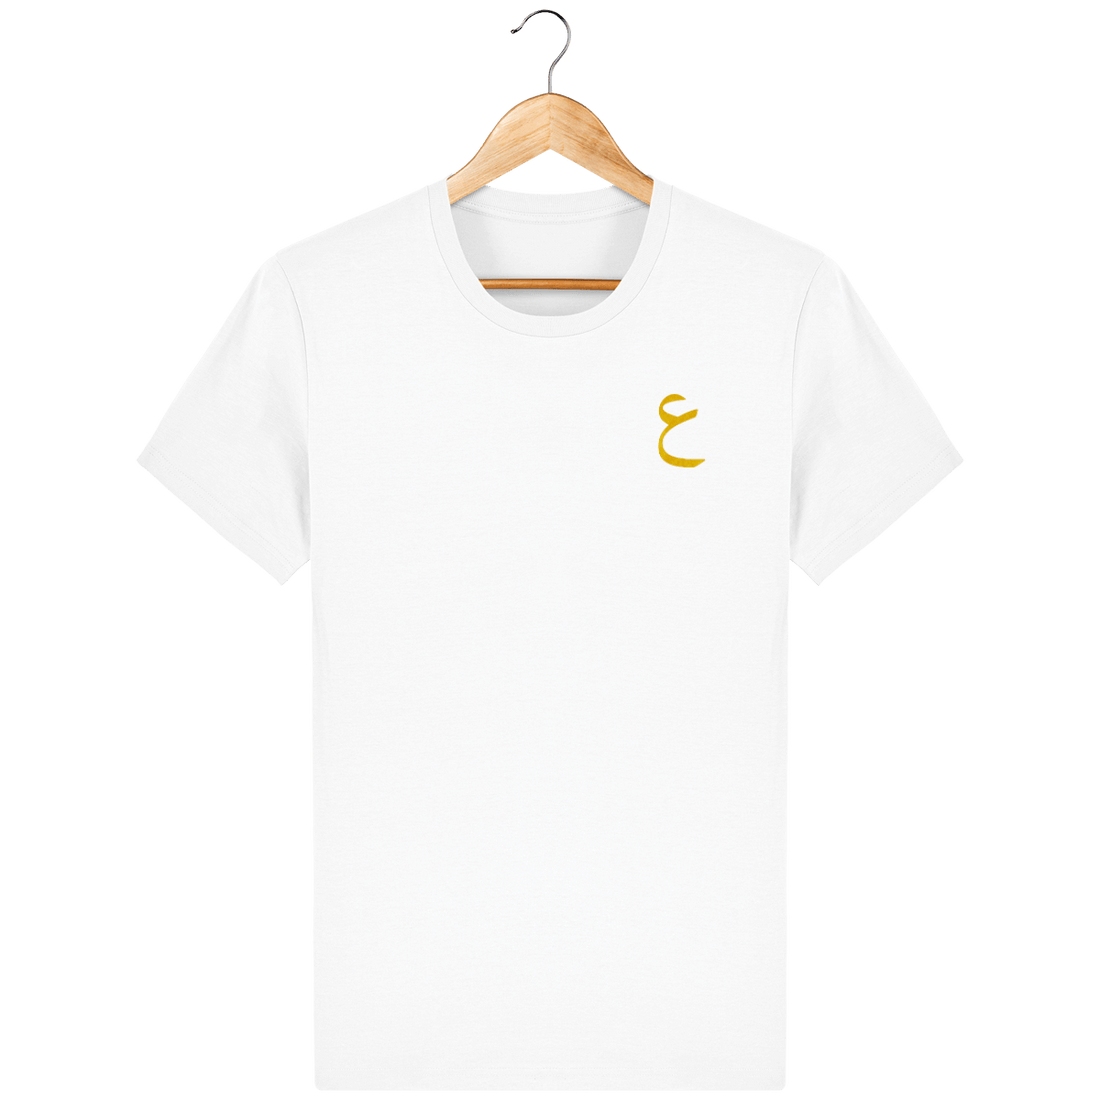 Unisexe>Tee-shirts - T-Shirt Homme <br> Lettre Arabe Ayn